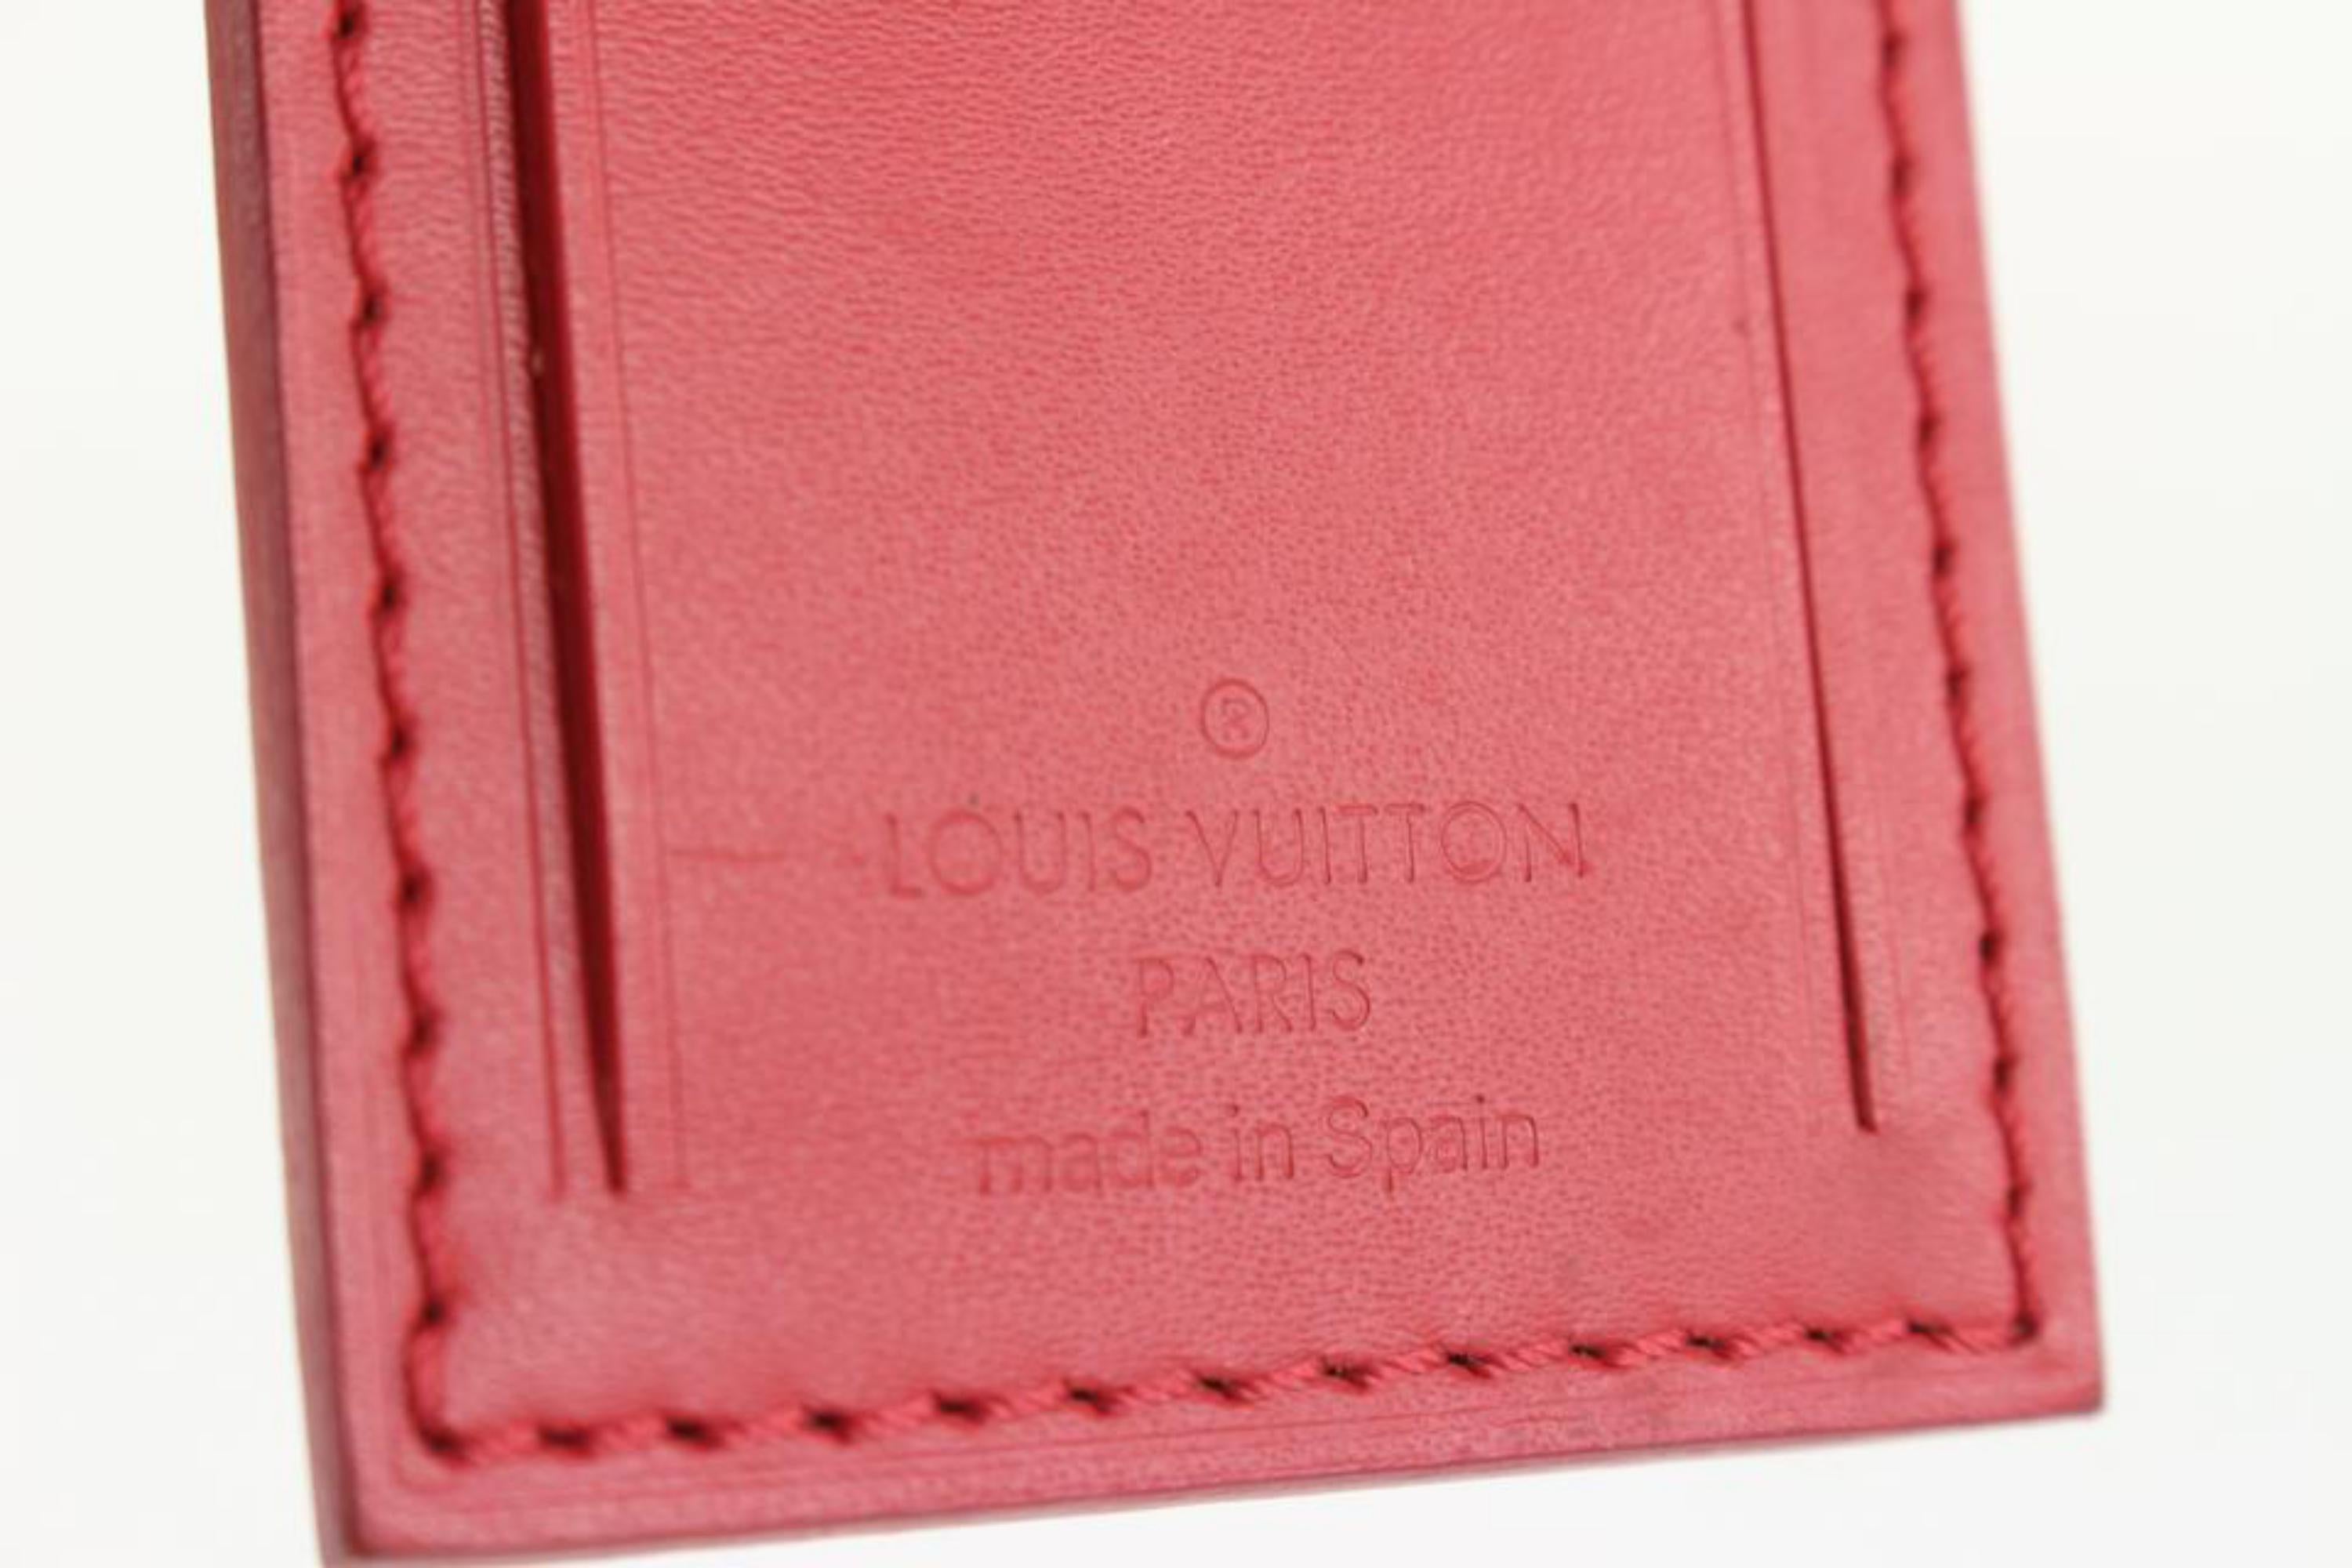 Louis Vuitton Red Leather Luggage Tag 108lv52 For Sale 7